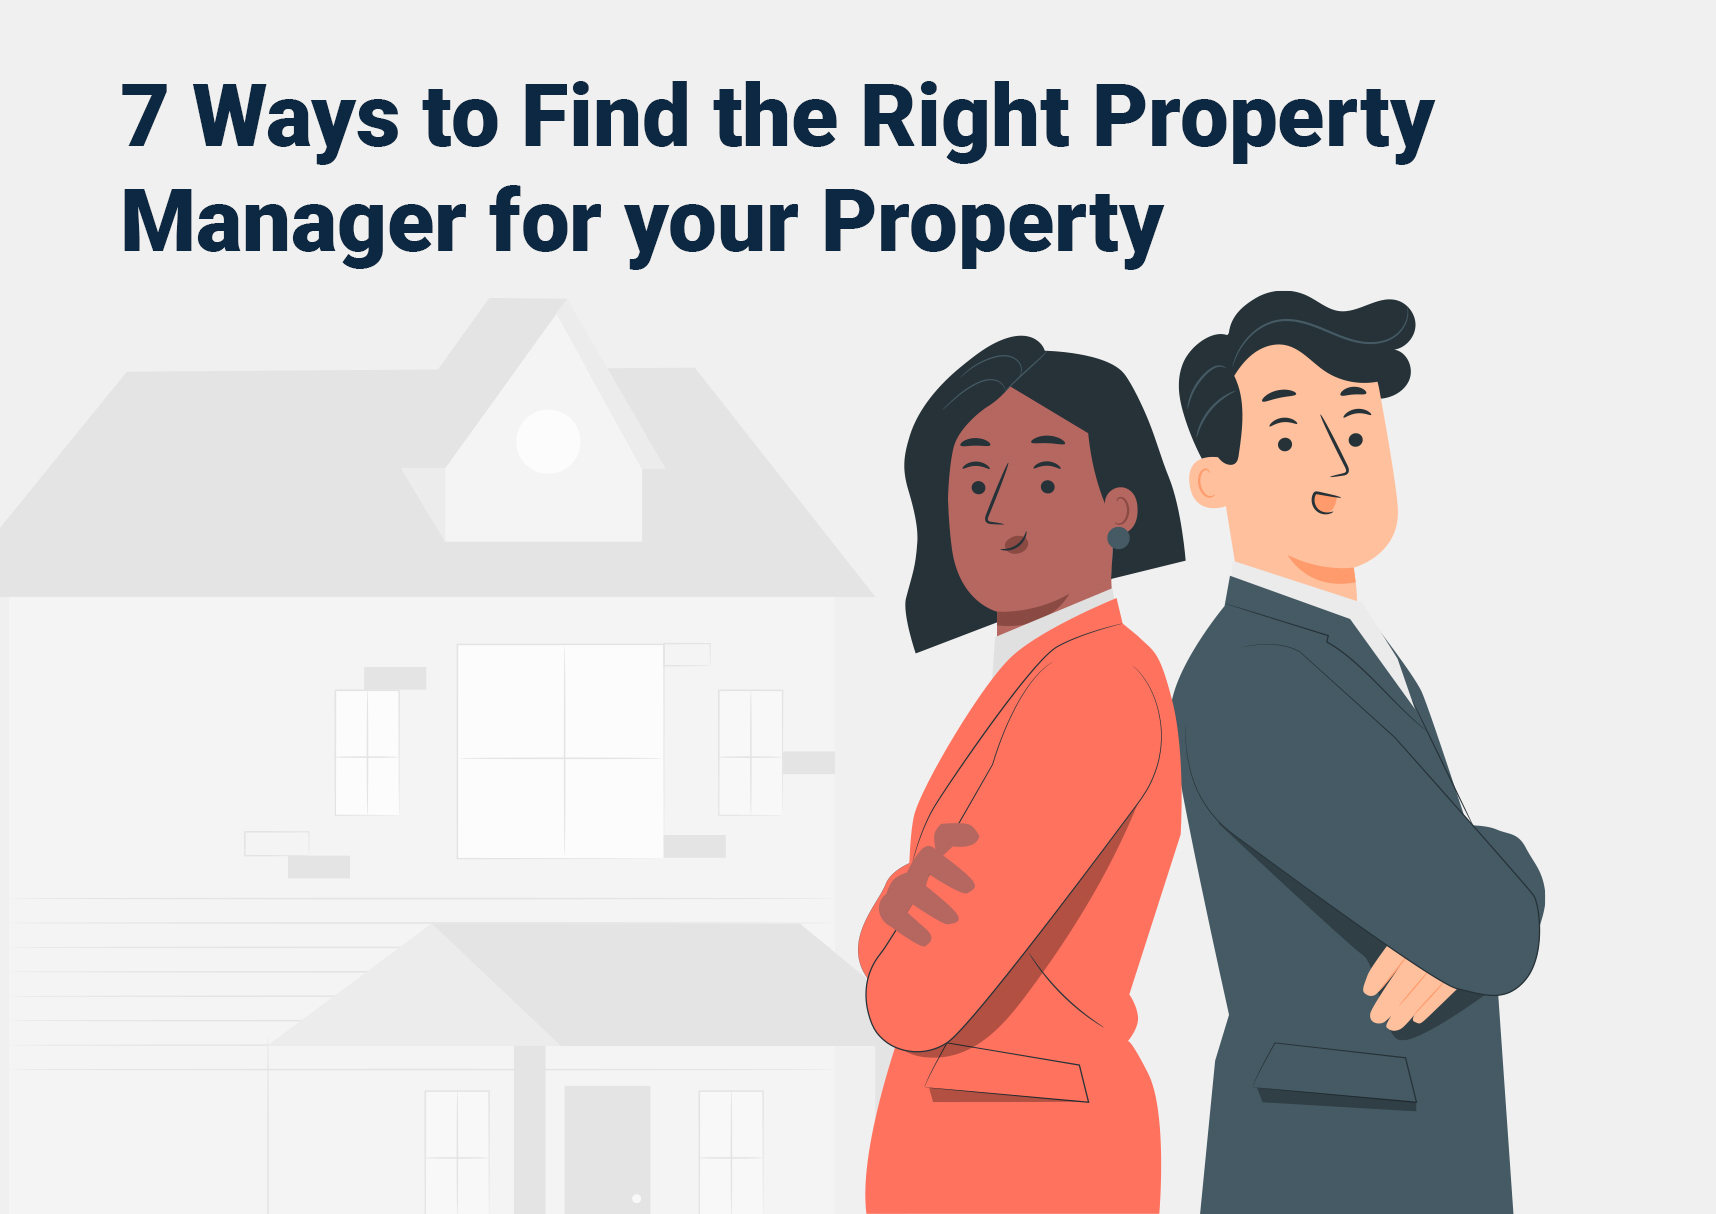 7 Ways to Find the Right Property Manager for your Property